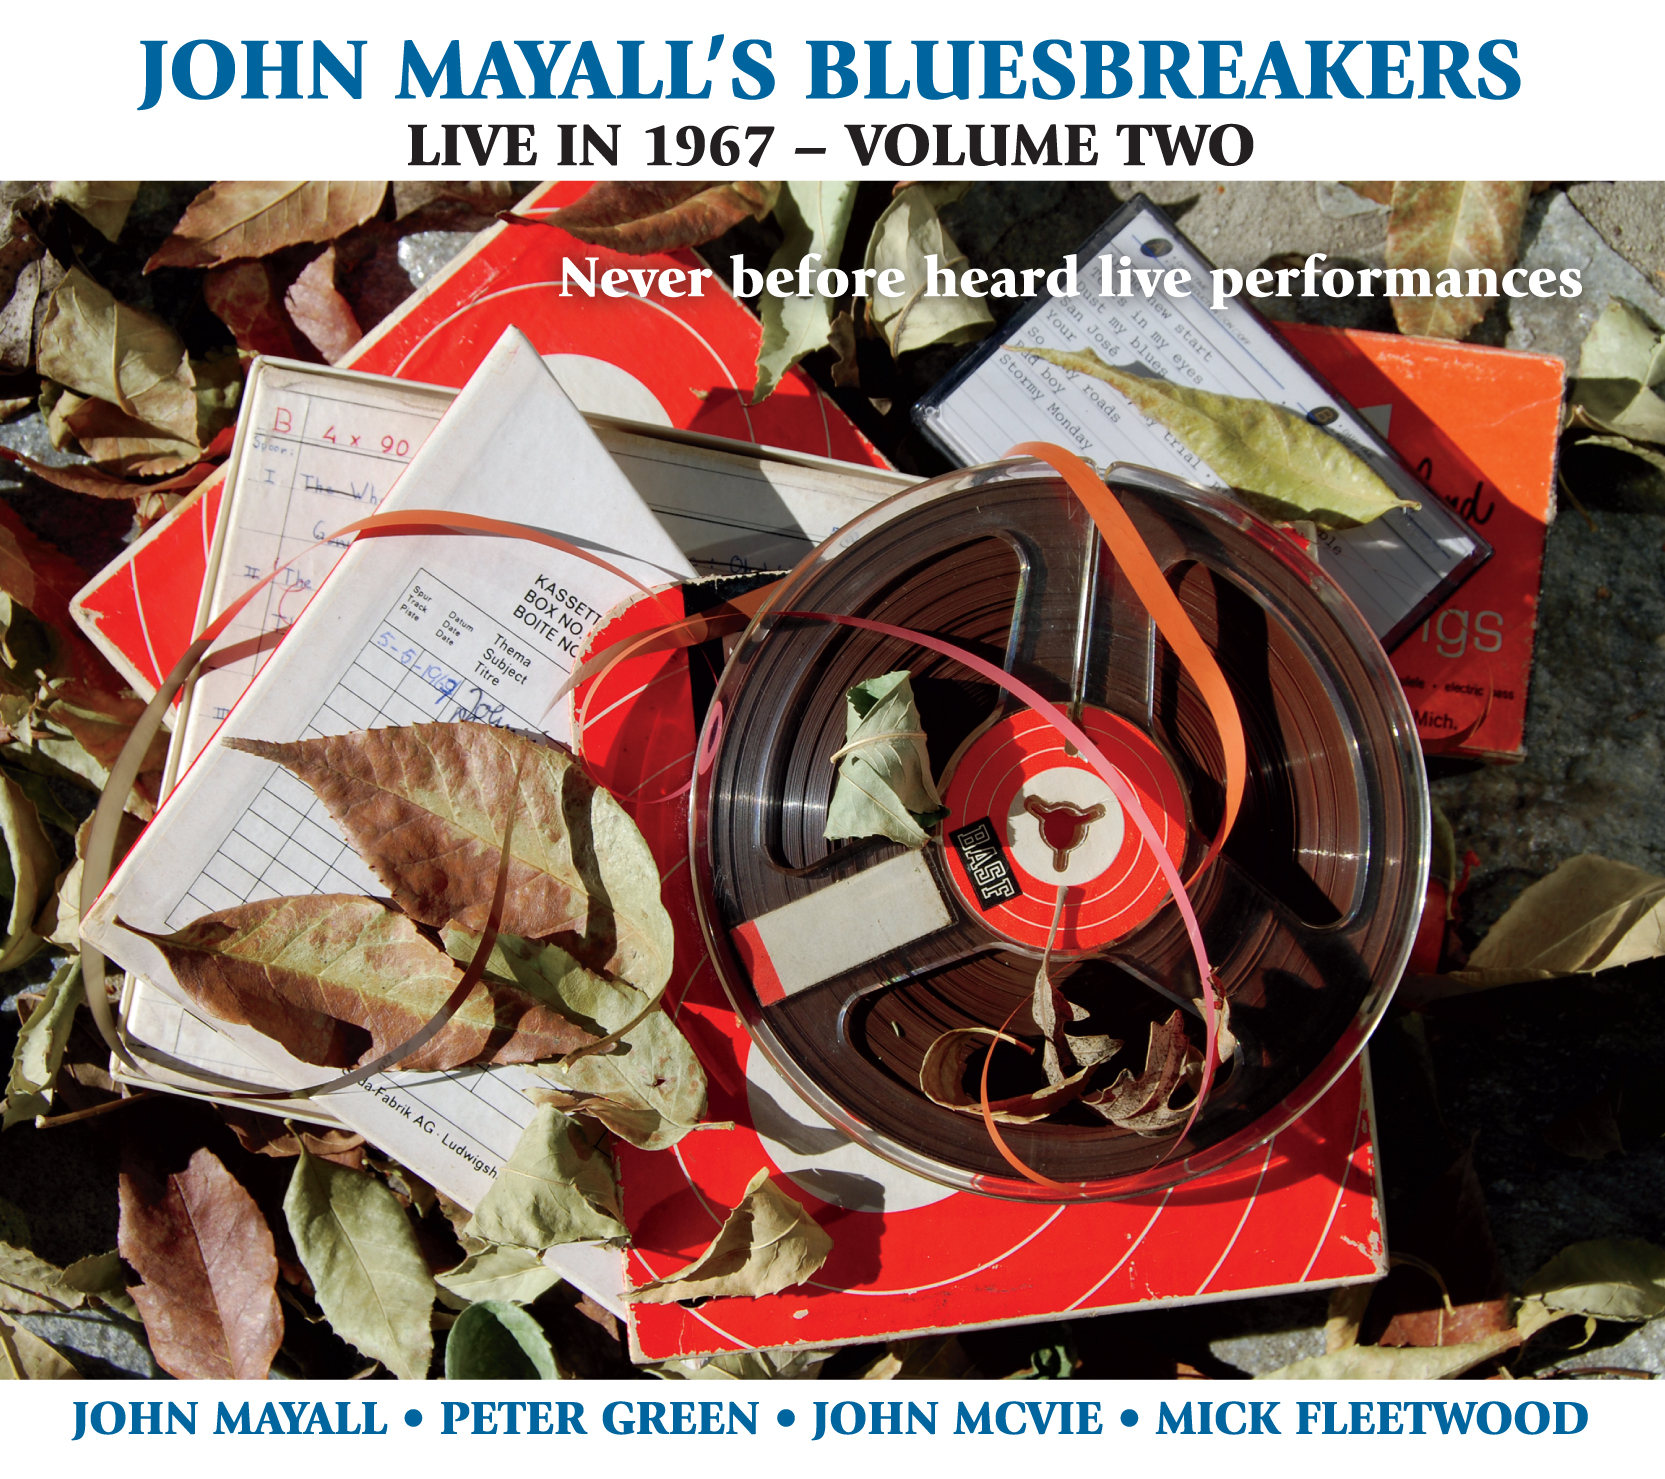 Forty Below Records Sets May 6 Release Date for John Mayall’s Bluesbreakers Live in 1967 – Volume Two CD